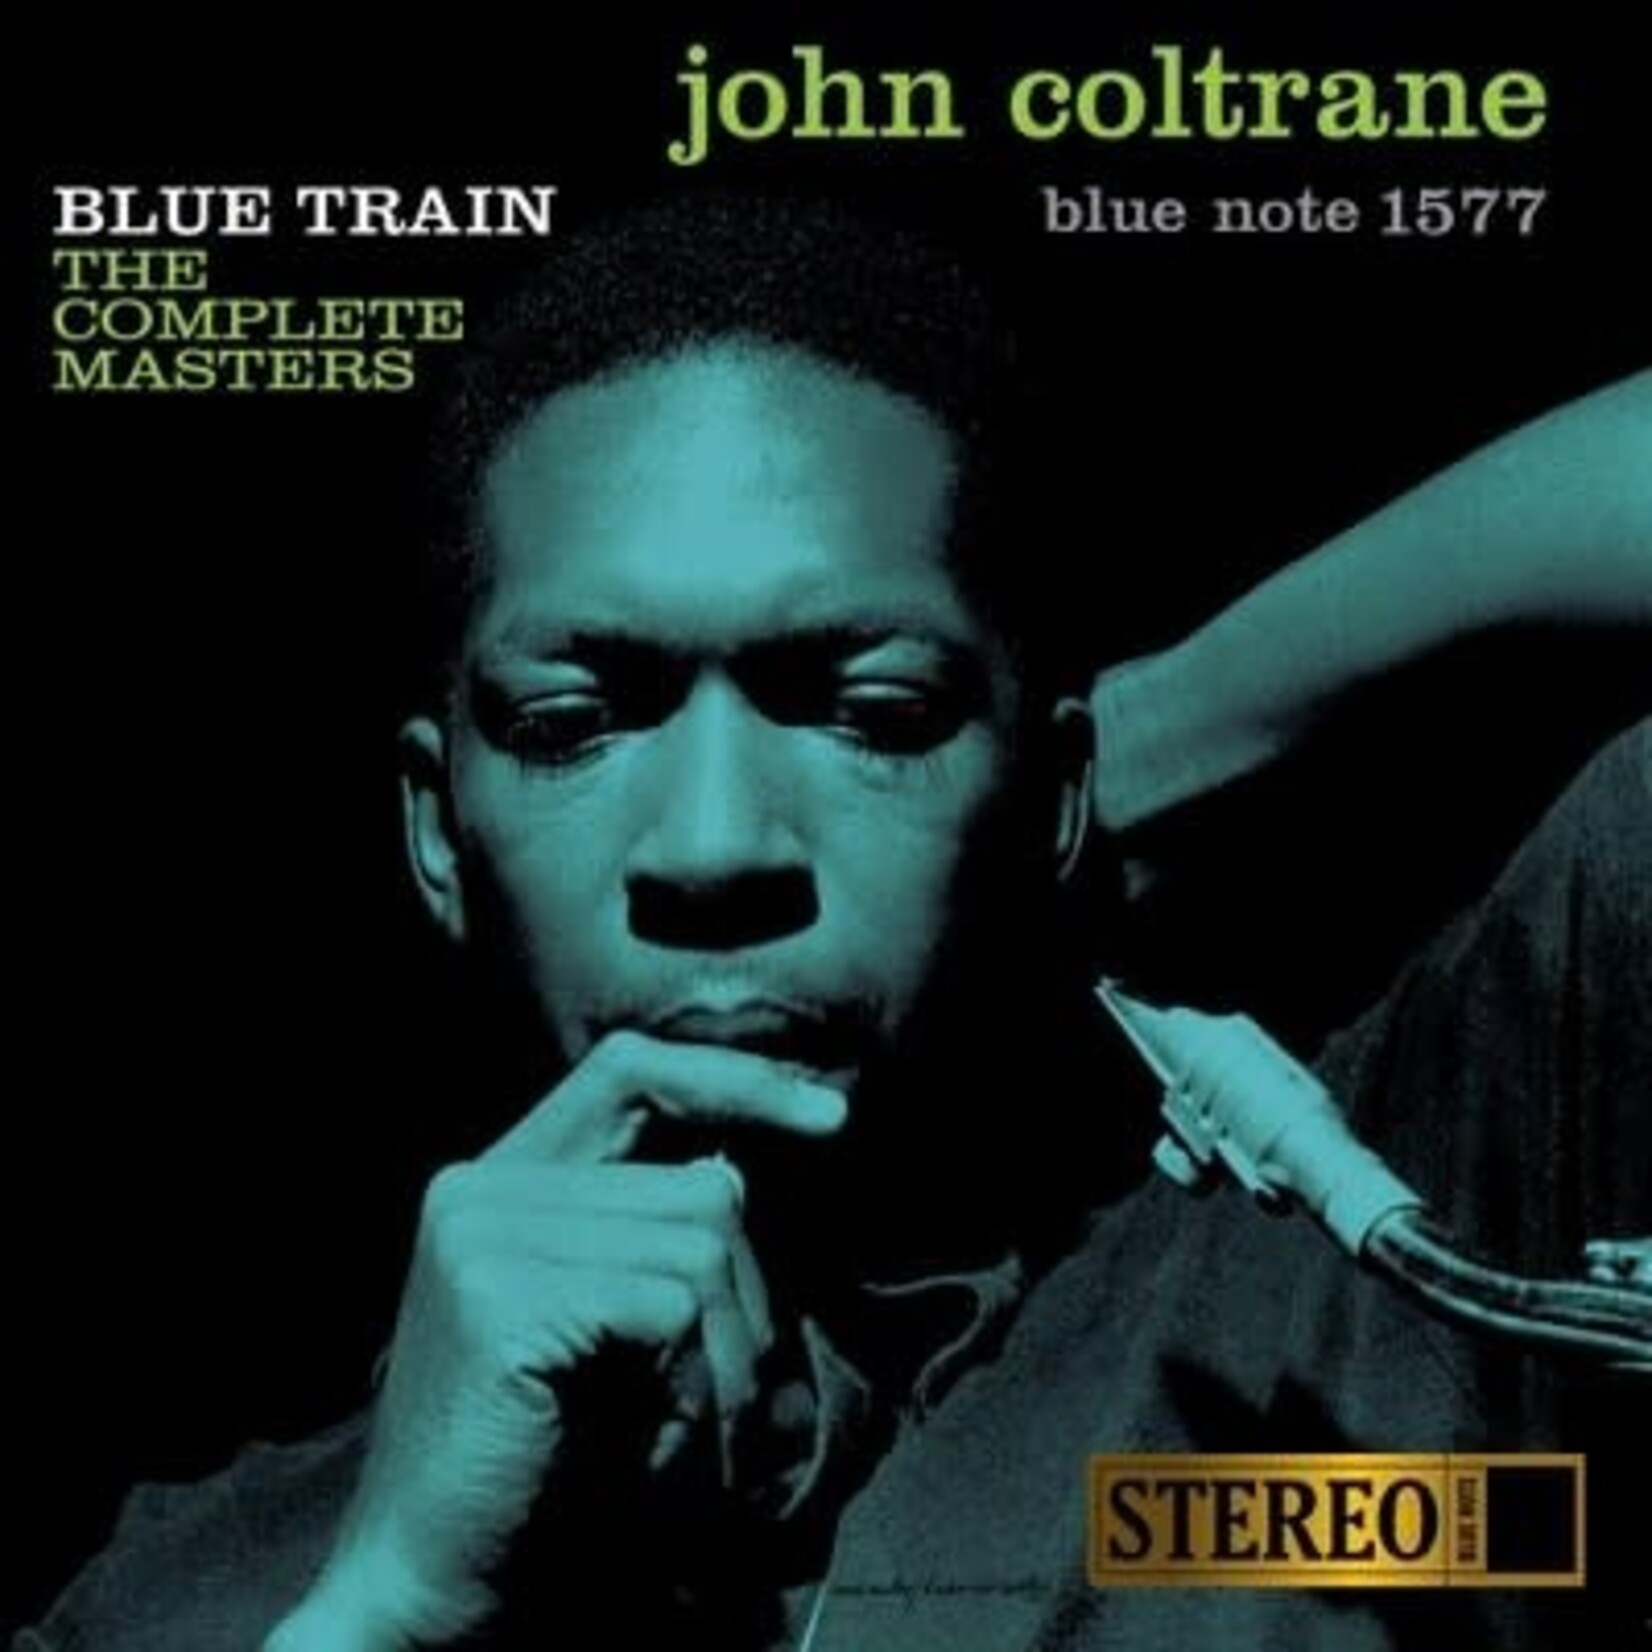 [New] Coltrane, John: Blue Train - The Complete Masters (2LP, Blue Note Tone Poet, 180g, stereo) [BLUE NOTE]